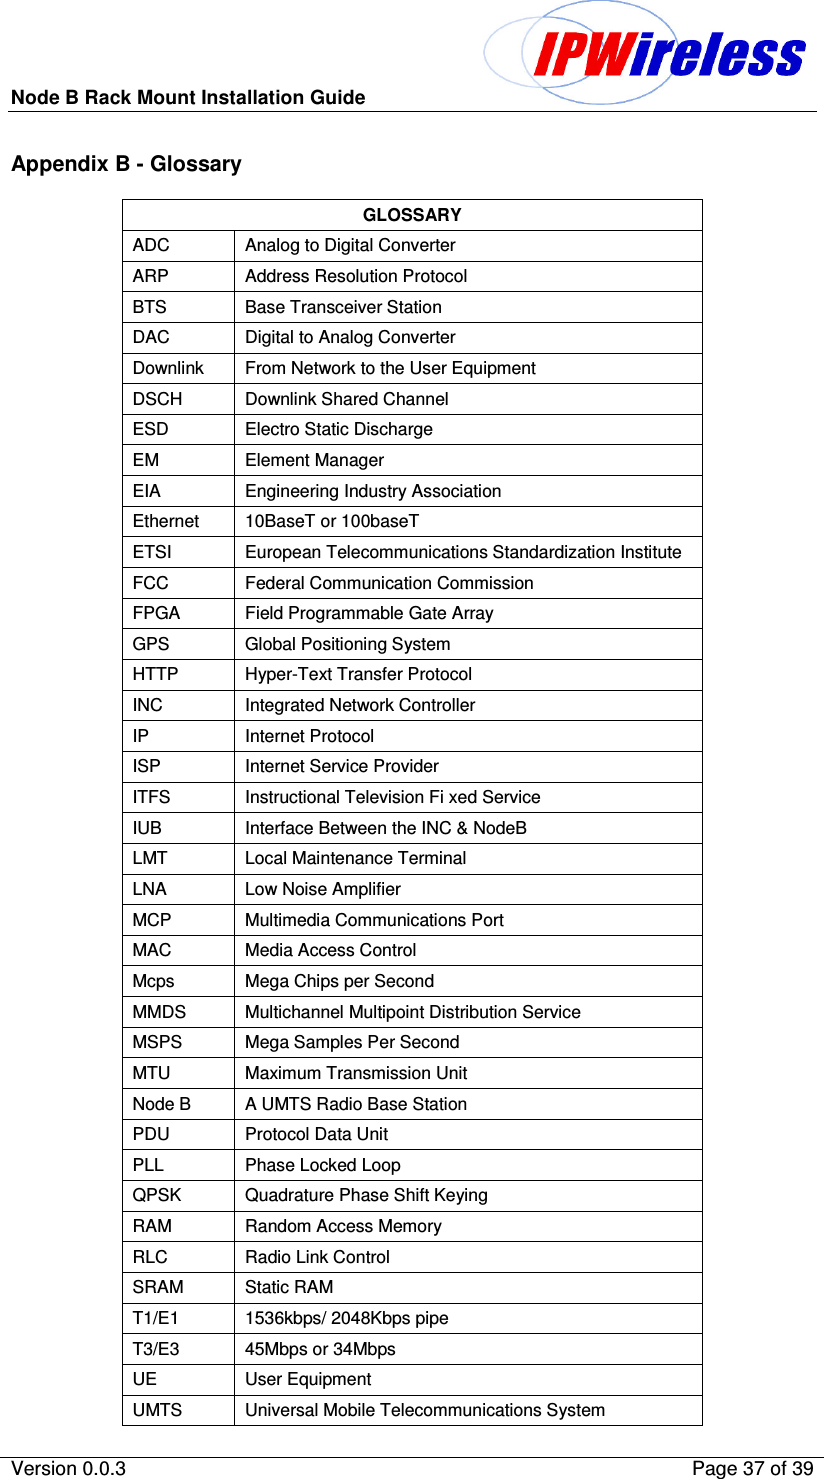 Node B Rack Mount Installation Guide                          Version 0.0.3    Page 37 of 39  Appendix B - Glossary GLOSSARY ADC   Analog to Digital Converter ARP   Address Resolution Protocol BTS   Base Transceiver Station DAC   Digital to Analog Converter Downlink   From Network to the User Equipment DSCH   Downlink Shared Channel ESD   Electro Static Discharge EM   Element Manager EIA   Engineering Industry Association Ethernet  10BaseT or 100baseT ETSI   European Telecommunications Standardization Institute FCC   Federal Communication Commission FPGA   Field Programmable Gate Array GPS   Global Positioning System HTTP    Hyper-Text Transfer Protocol INC   Integrated Network Controller IP   Internet Protocol ISP   Internet Service Provider ITFS   Instructional Television Fi xed Service IUB   Interface Between the INC &amp; NodeB LMT   Local Maintenance Terminal LNA   Low Noise Amplifier MCP   Multimedia Communications Port MAC   Media Access Control Mcps   Mega Chips per Second MMDS   Multichannel Multipoint Distribution Service MSPS   Mega Samples Per Second MTU   Maximum Transmission Unit Node B   A UMTS Radio Base Station PDU   Protocol Data Unit PLL   Phase Locked Loop QPSK   Quadrature Phase Shift Keying RAM   Random Access Memory RLC   Radio Link Control SRAM   Static RAM T1/E1   1536kbps/ 2048Kbps pipe T3/E3  45Mbps or 34Mbps UE   User Equipment UMTS   Universal Mobile Telecommunications System 